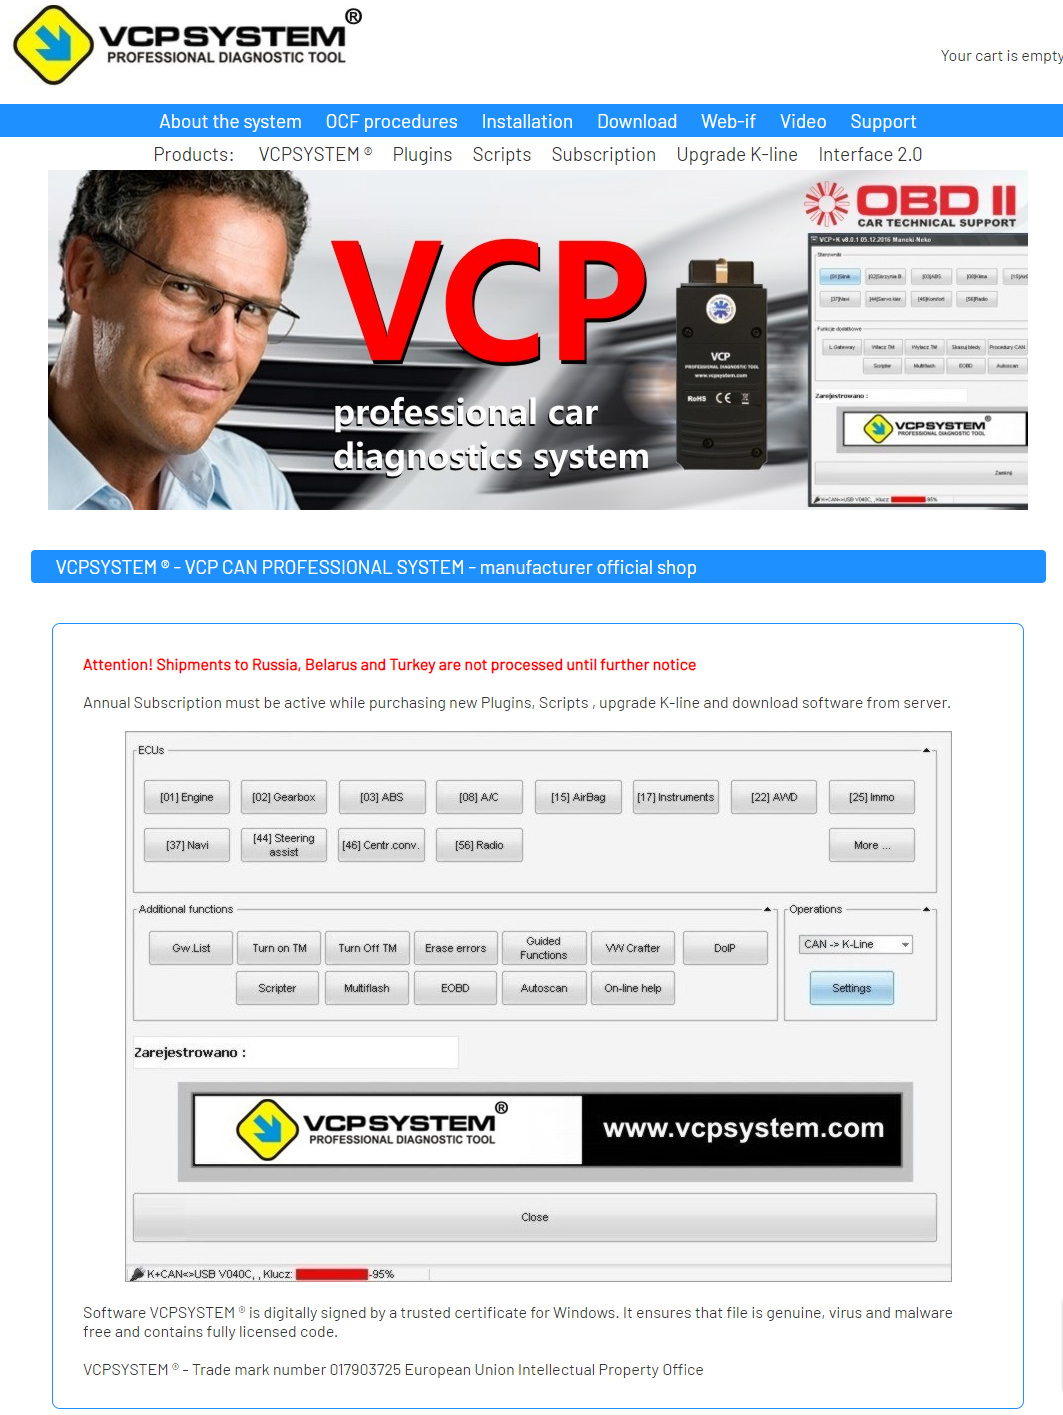 VCP CAN PROFESSIONAL SYSTEM